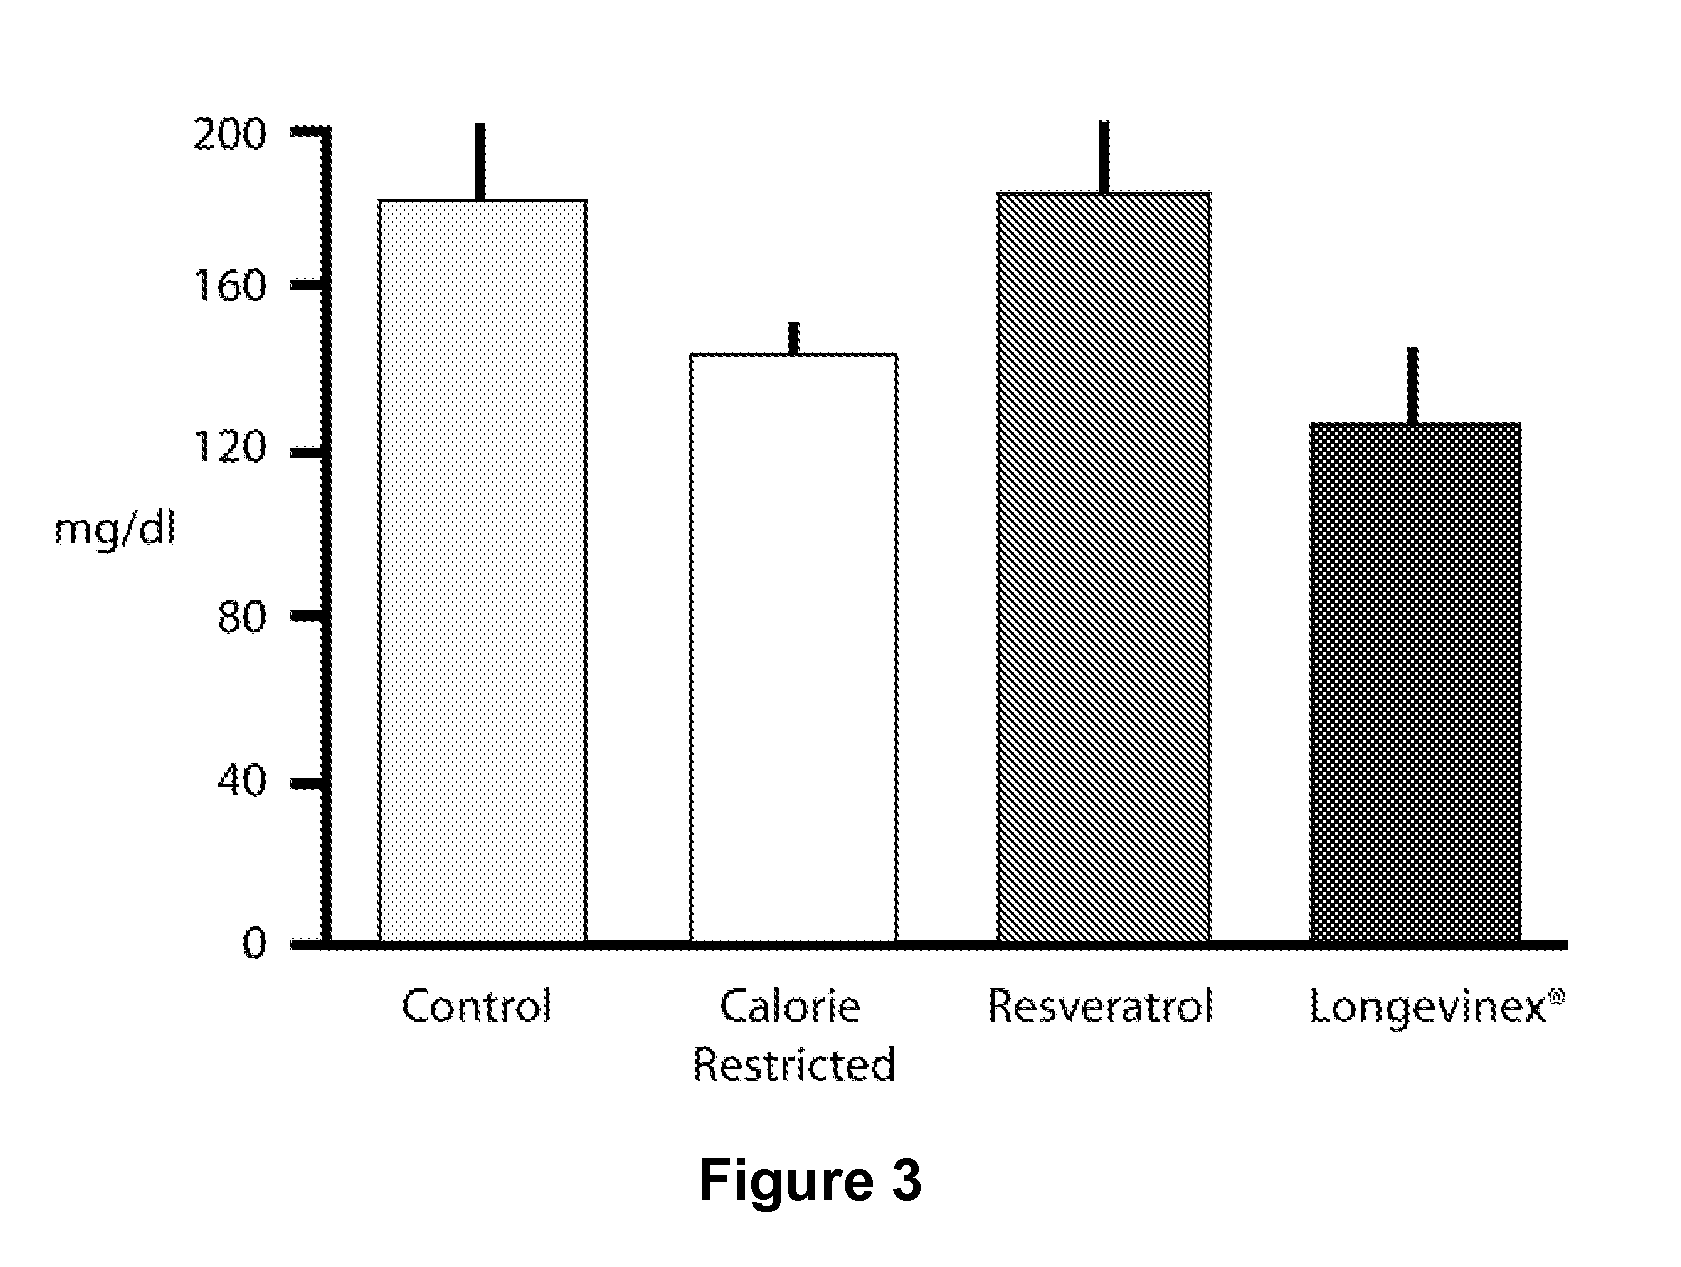 Resveratrol-Containing Compositions And Their Use In Modulating Gene Product Concentration Or Activity